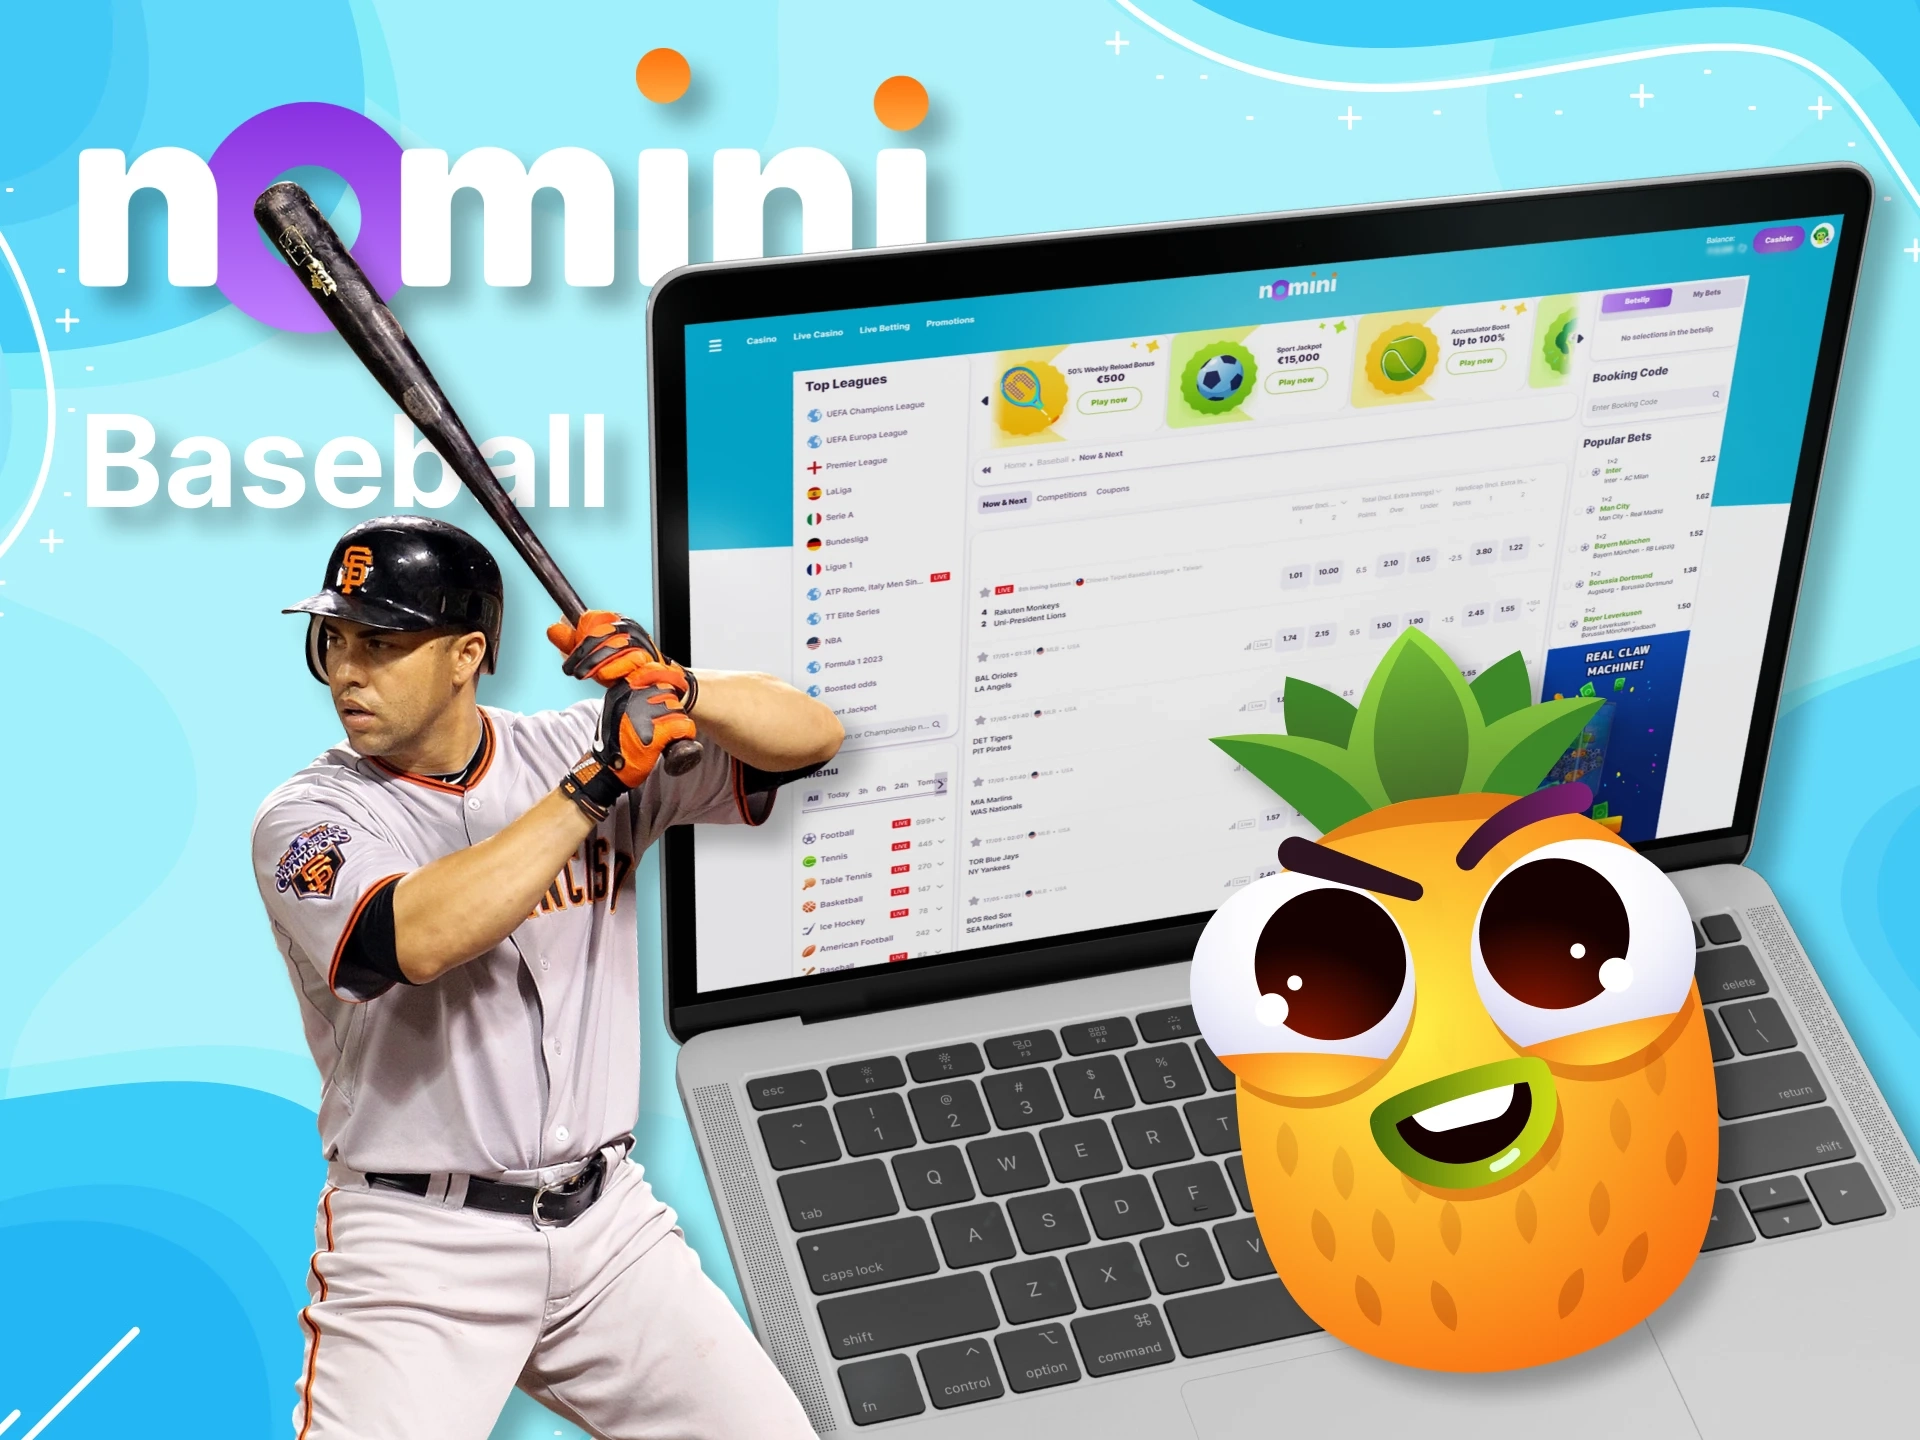 Bet on baseball games with Nomini.